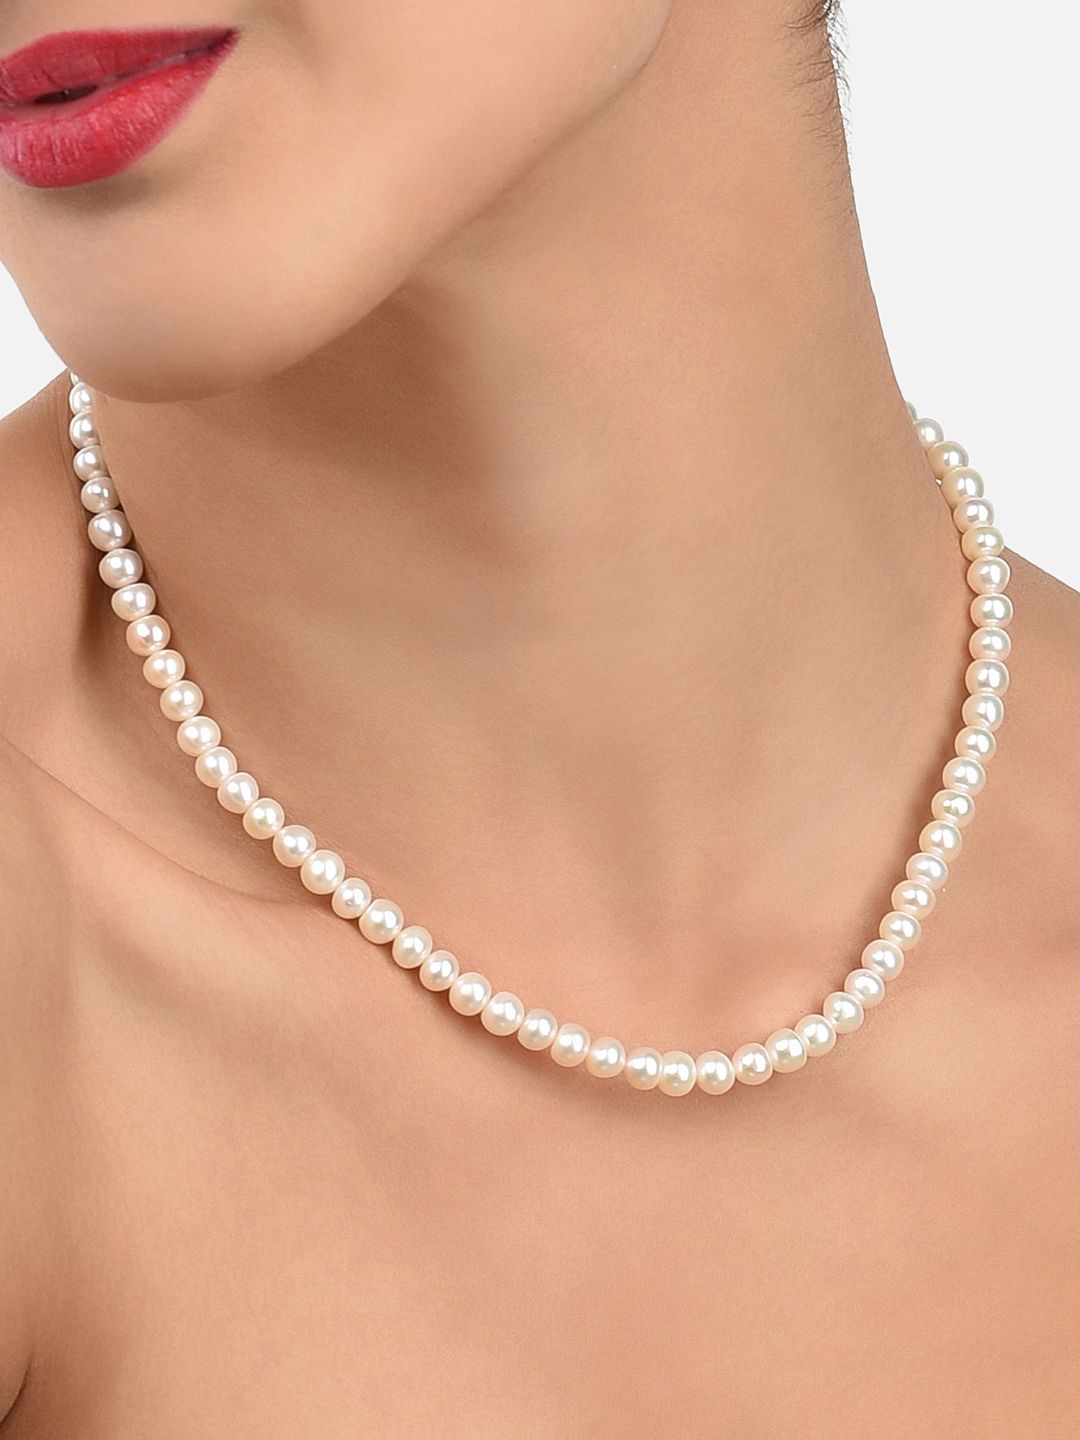 Zaveri Pearls Fresh Water Round Pearls 5-6mm AAA+ Quality Necklace Price in India